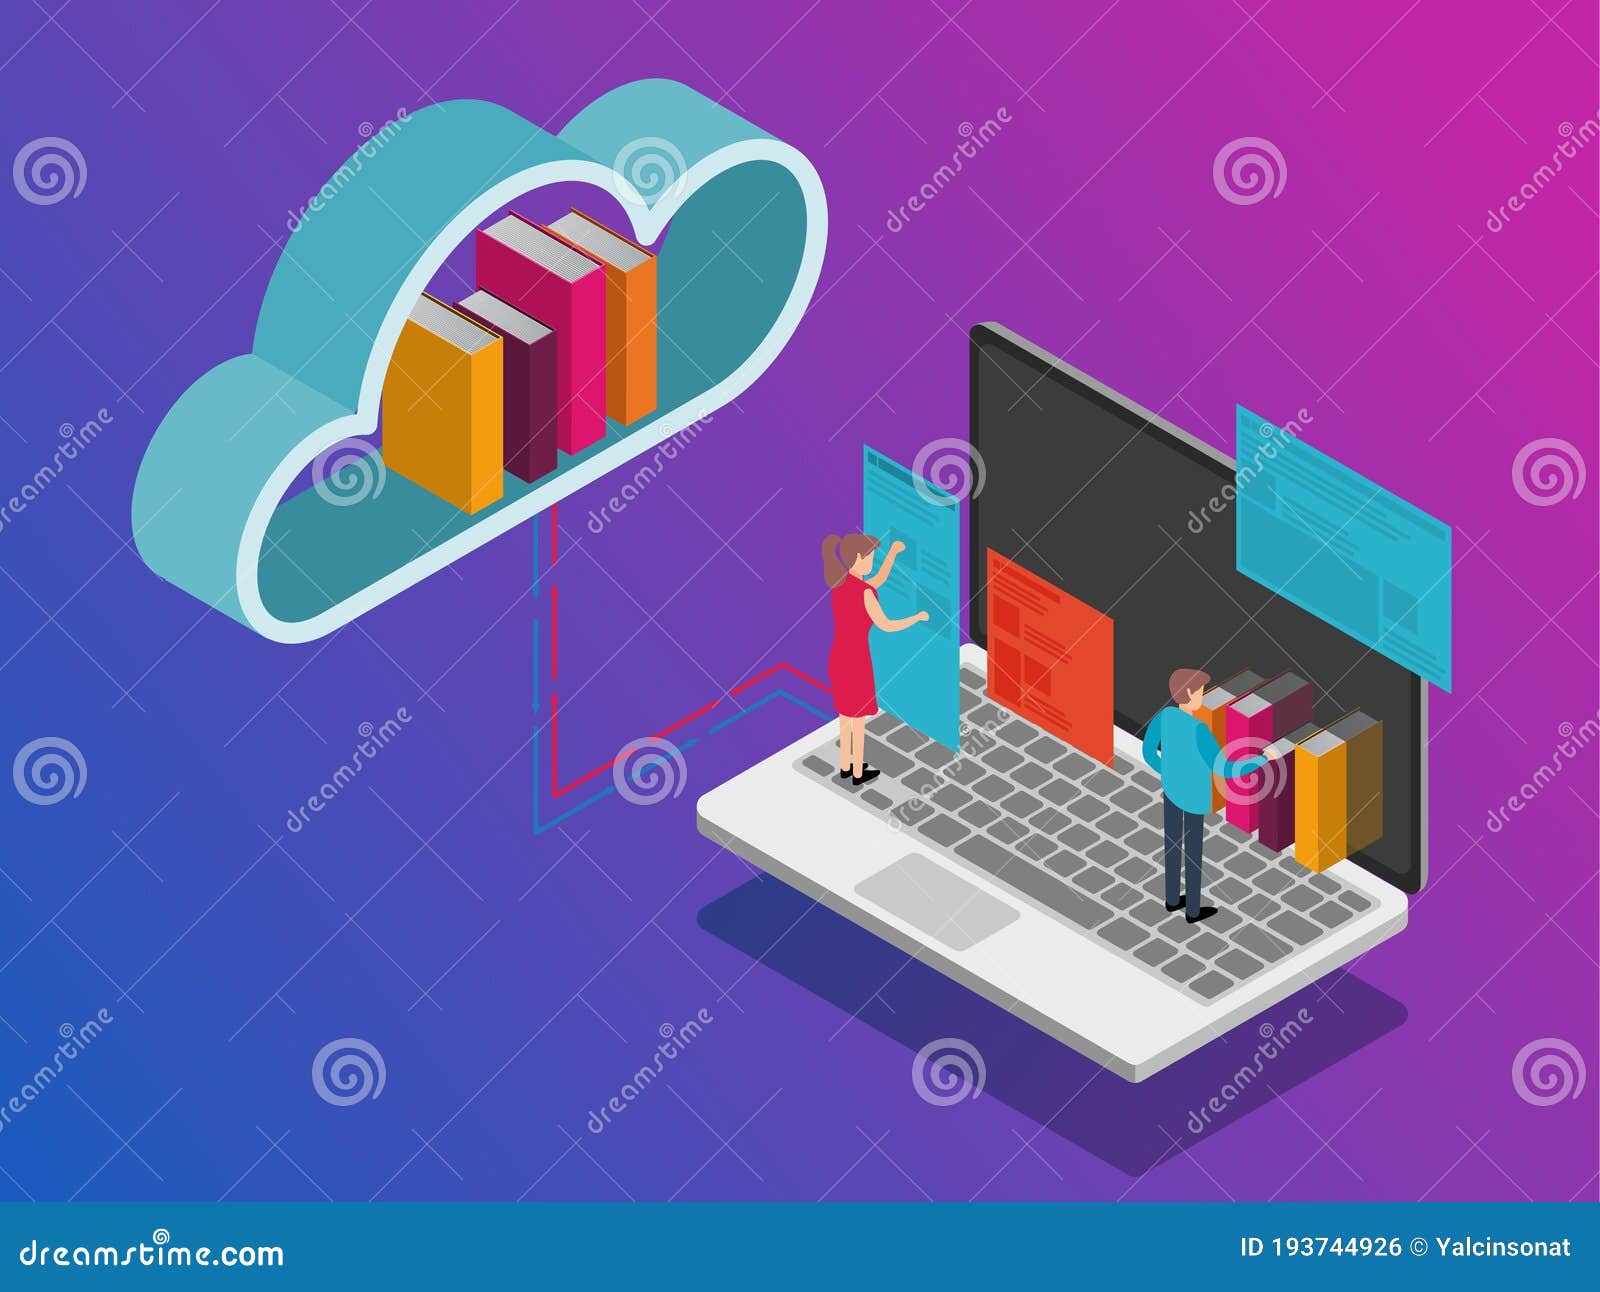 E Books In Online Cloud Computing System Images Stock Vector Illustration Of Laptop People 193744926